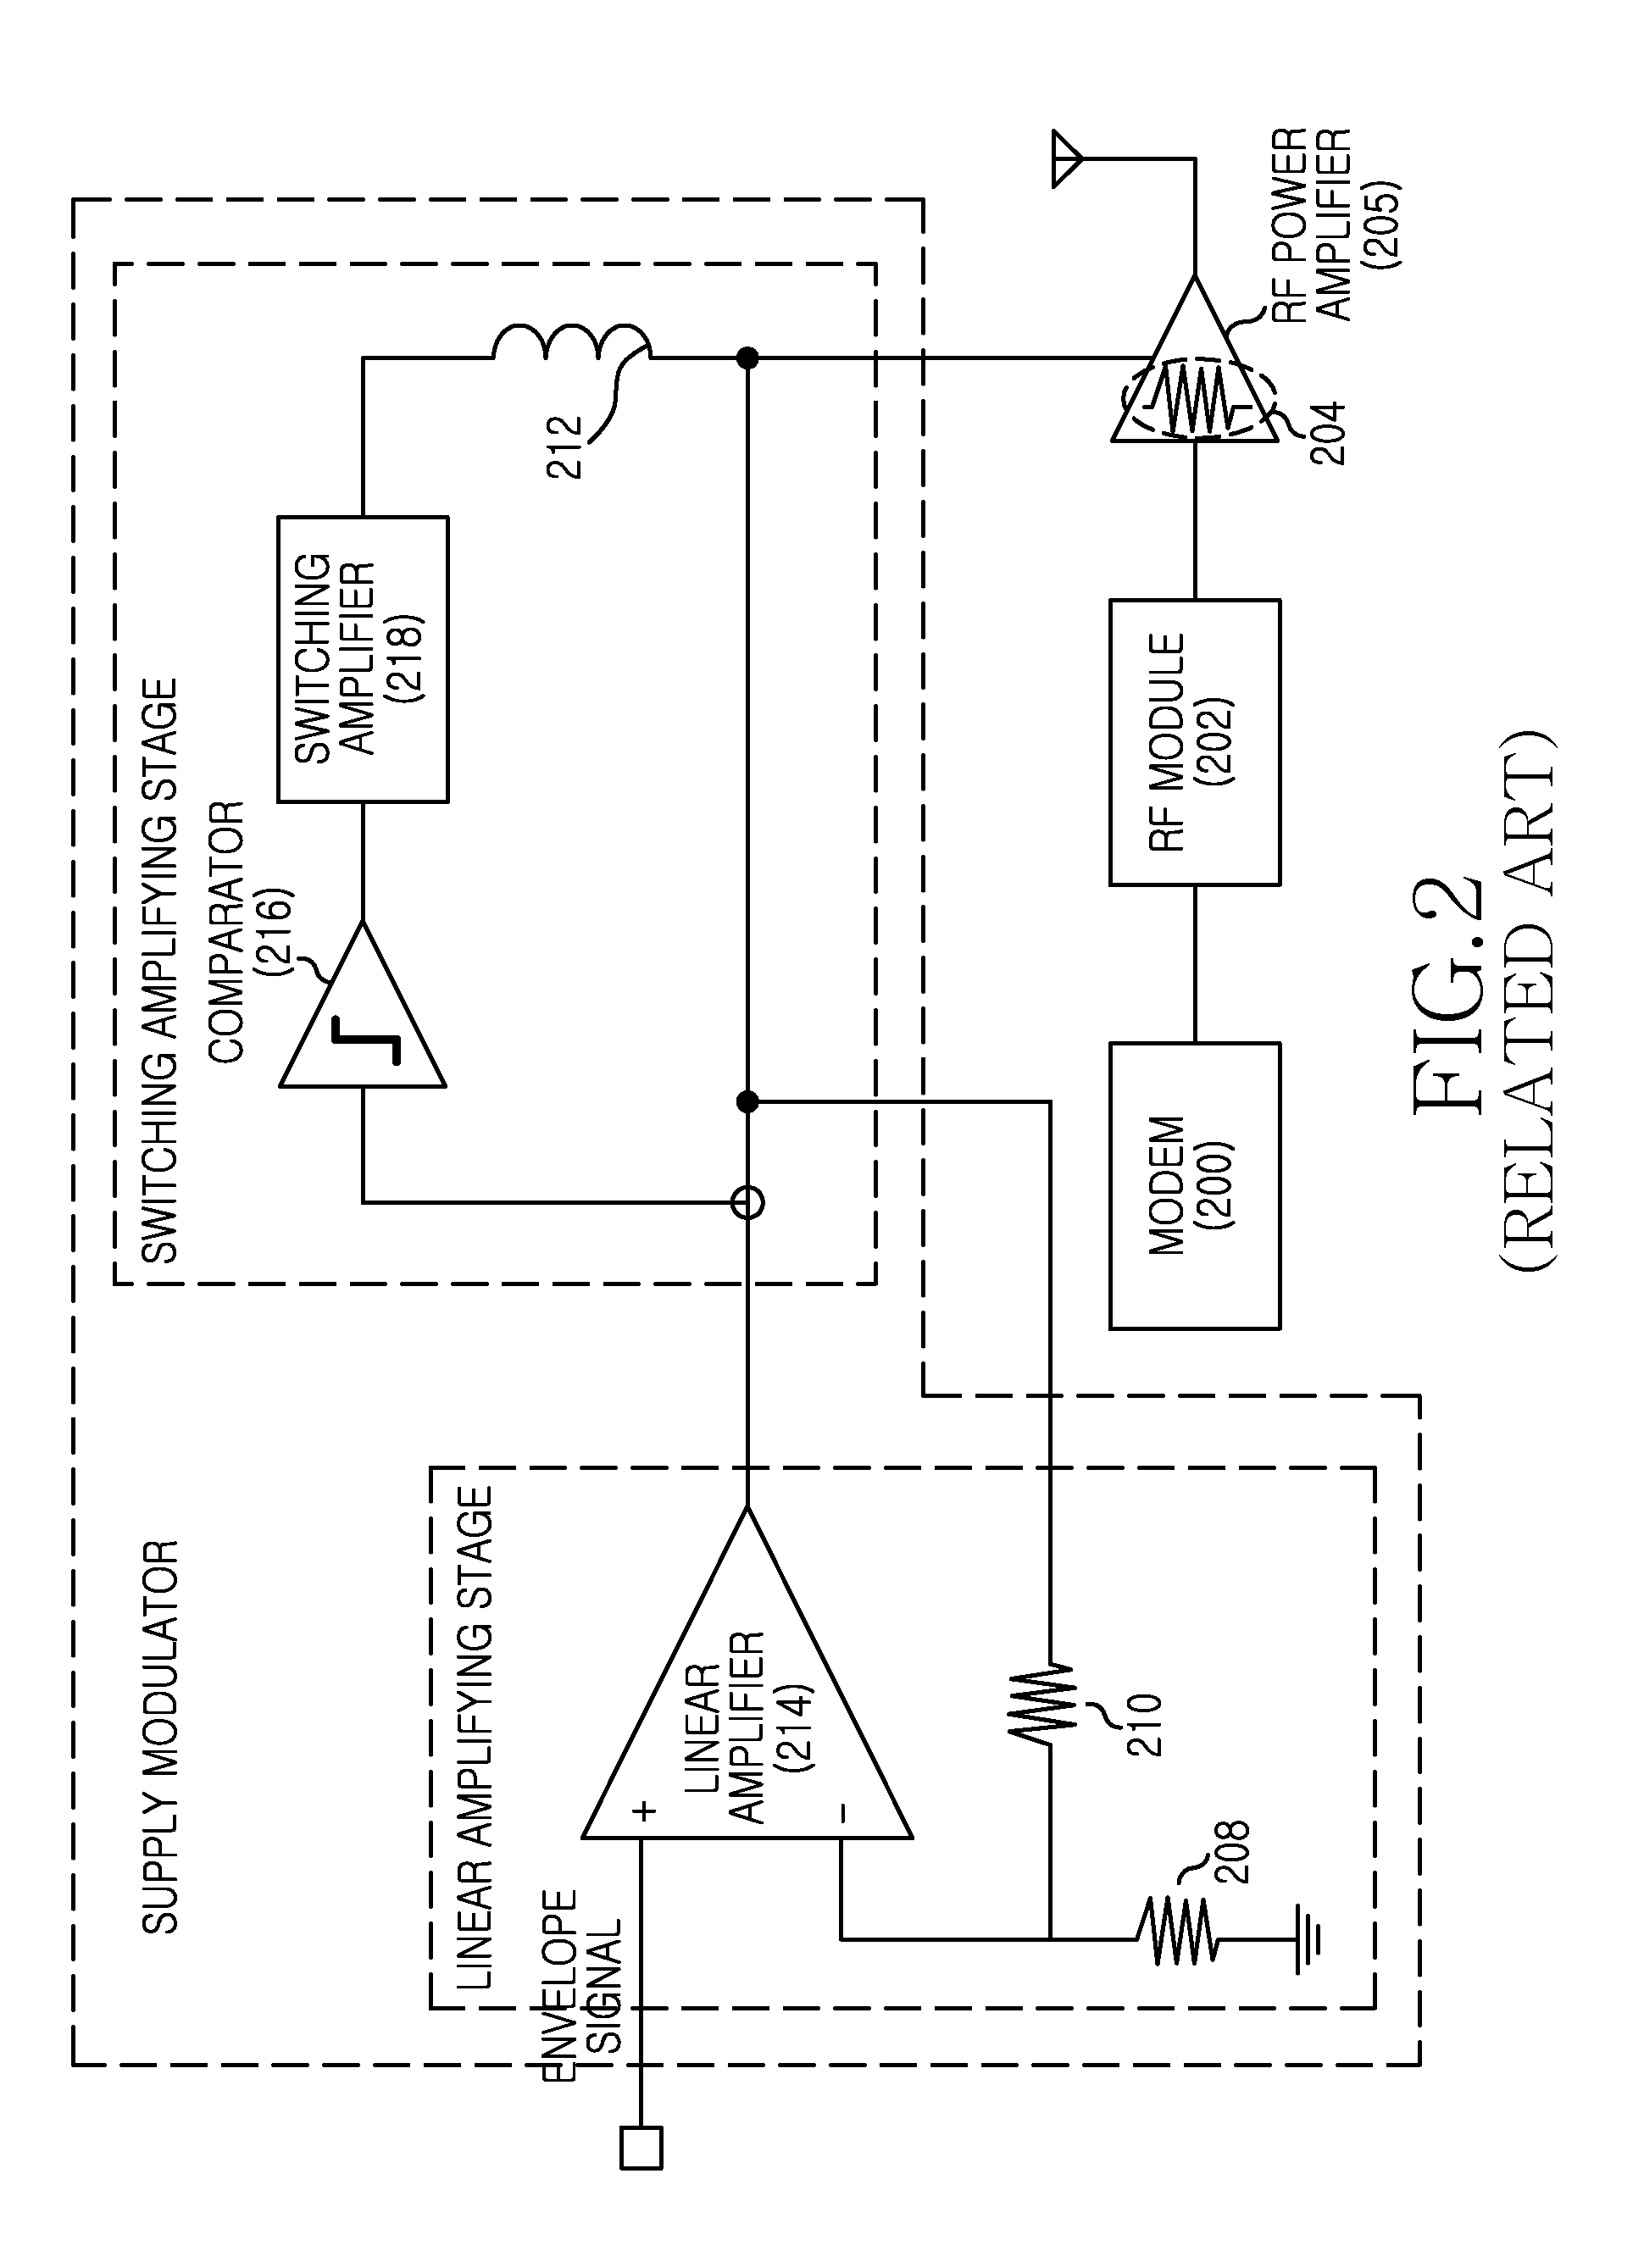 Apparatus and method for calibration of supply modulation in transmitter